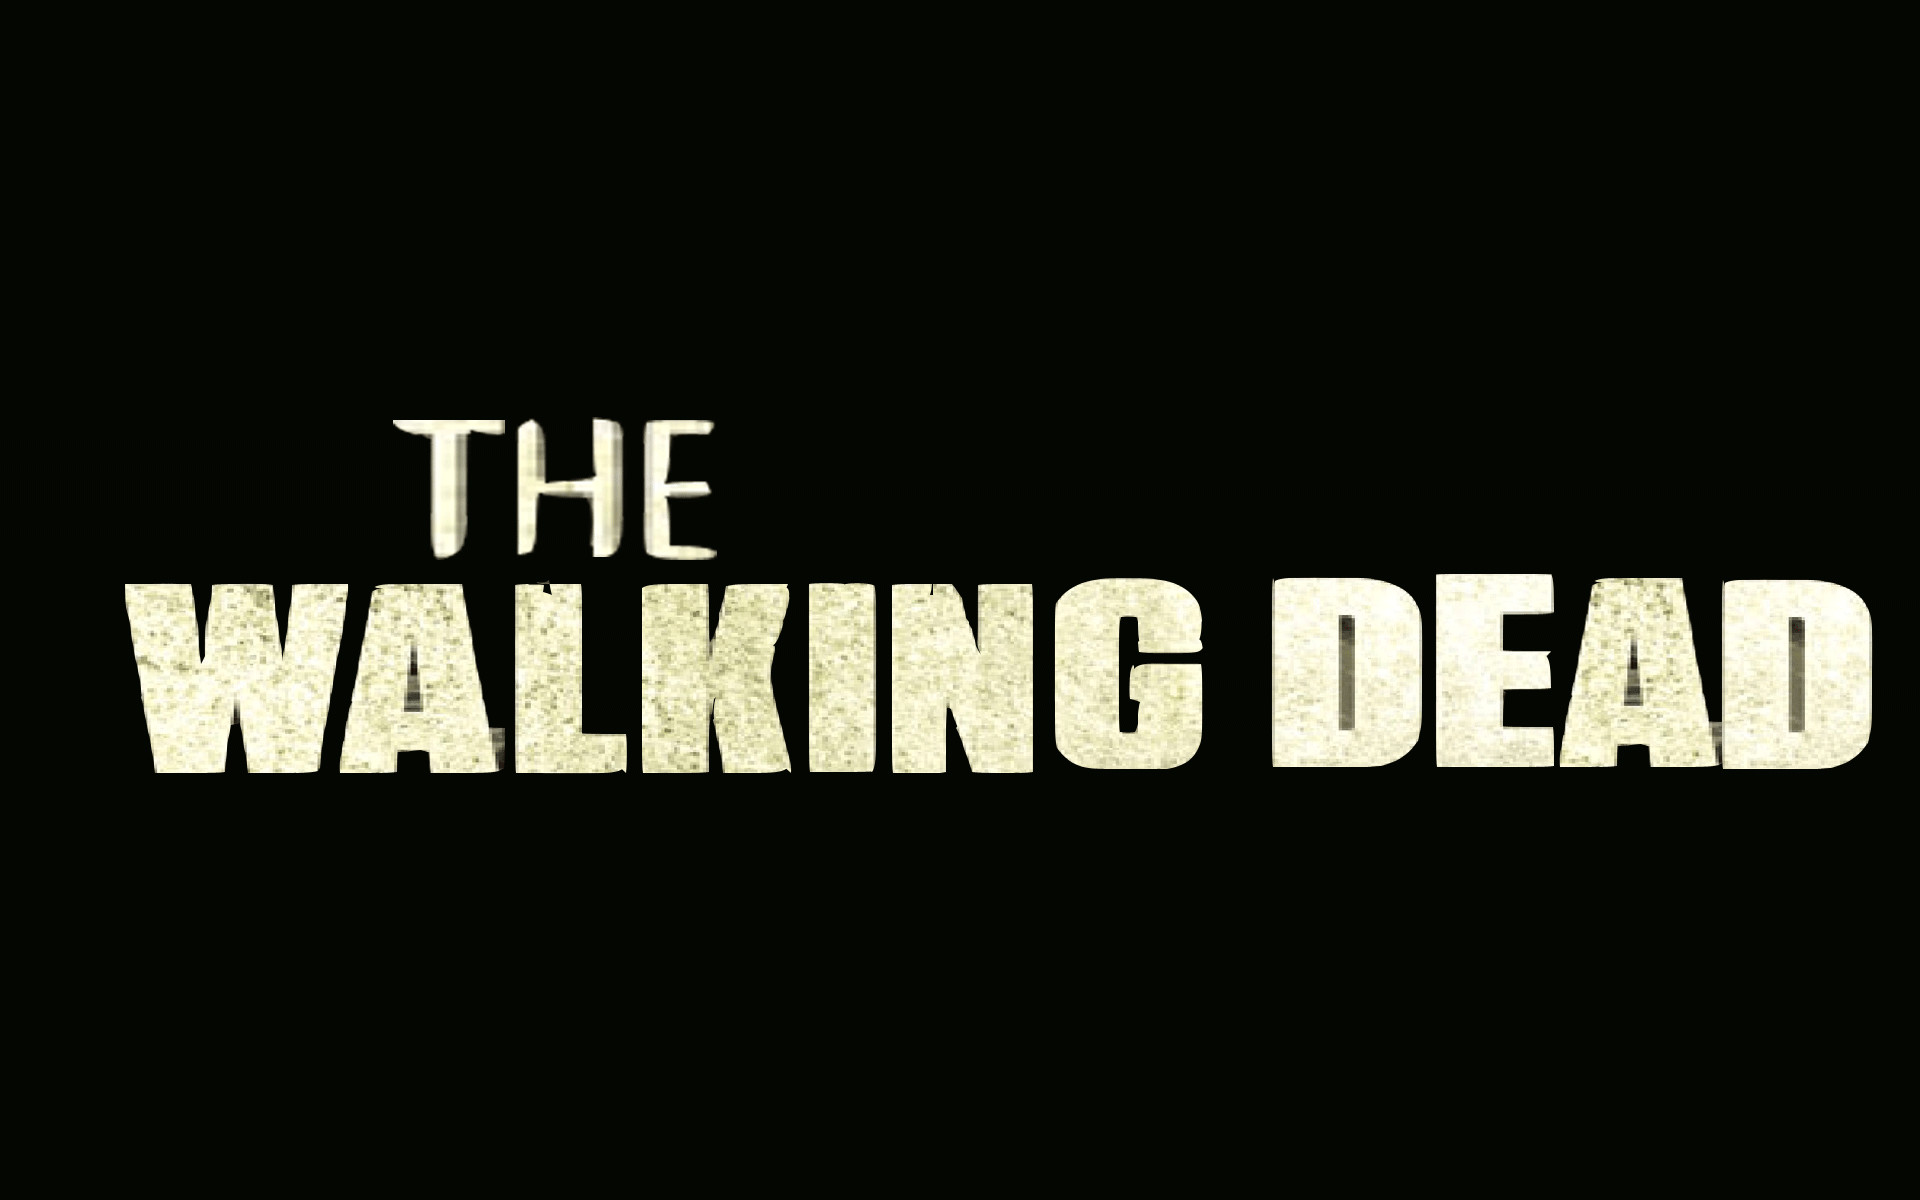 1920x1200 The Walking Dead Desktop Computer Wallpaper And Animated GIF